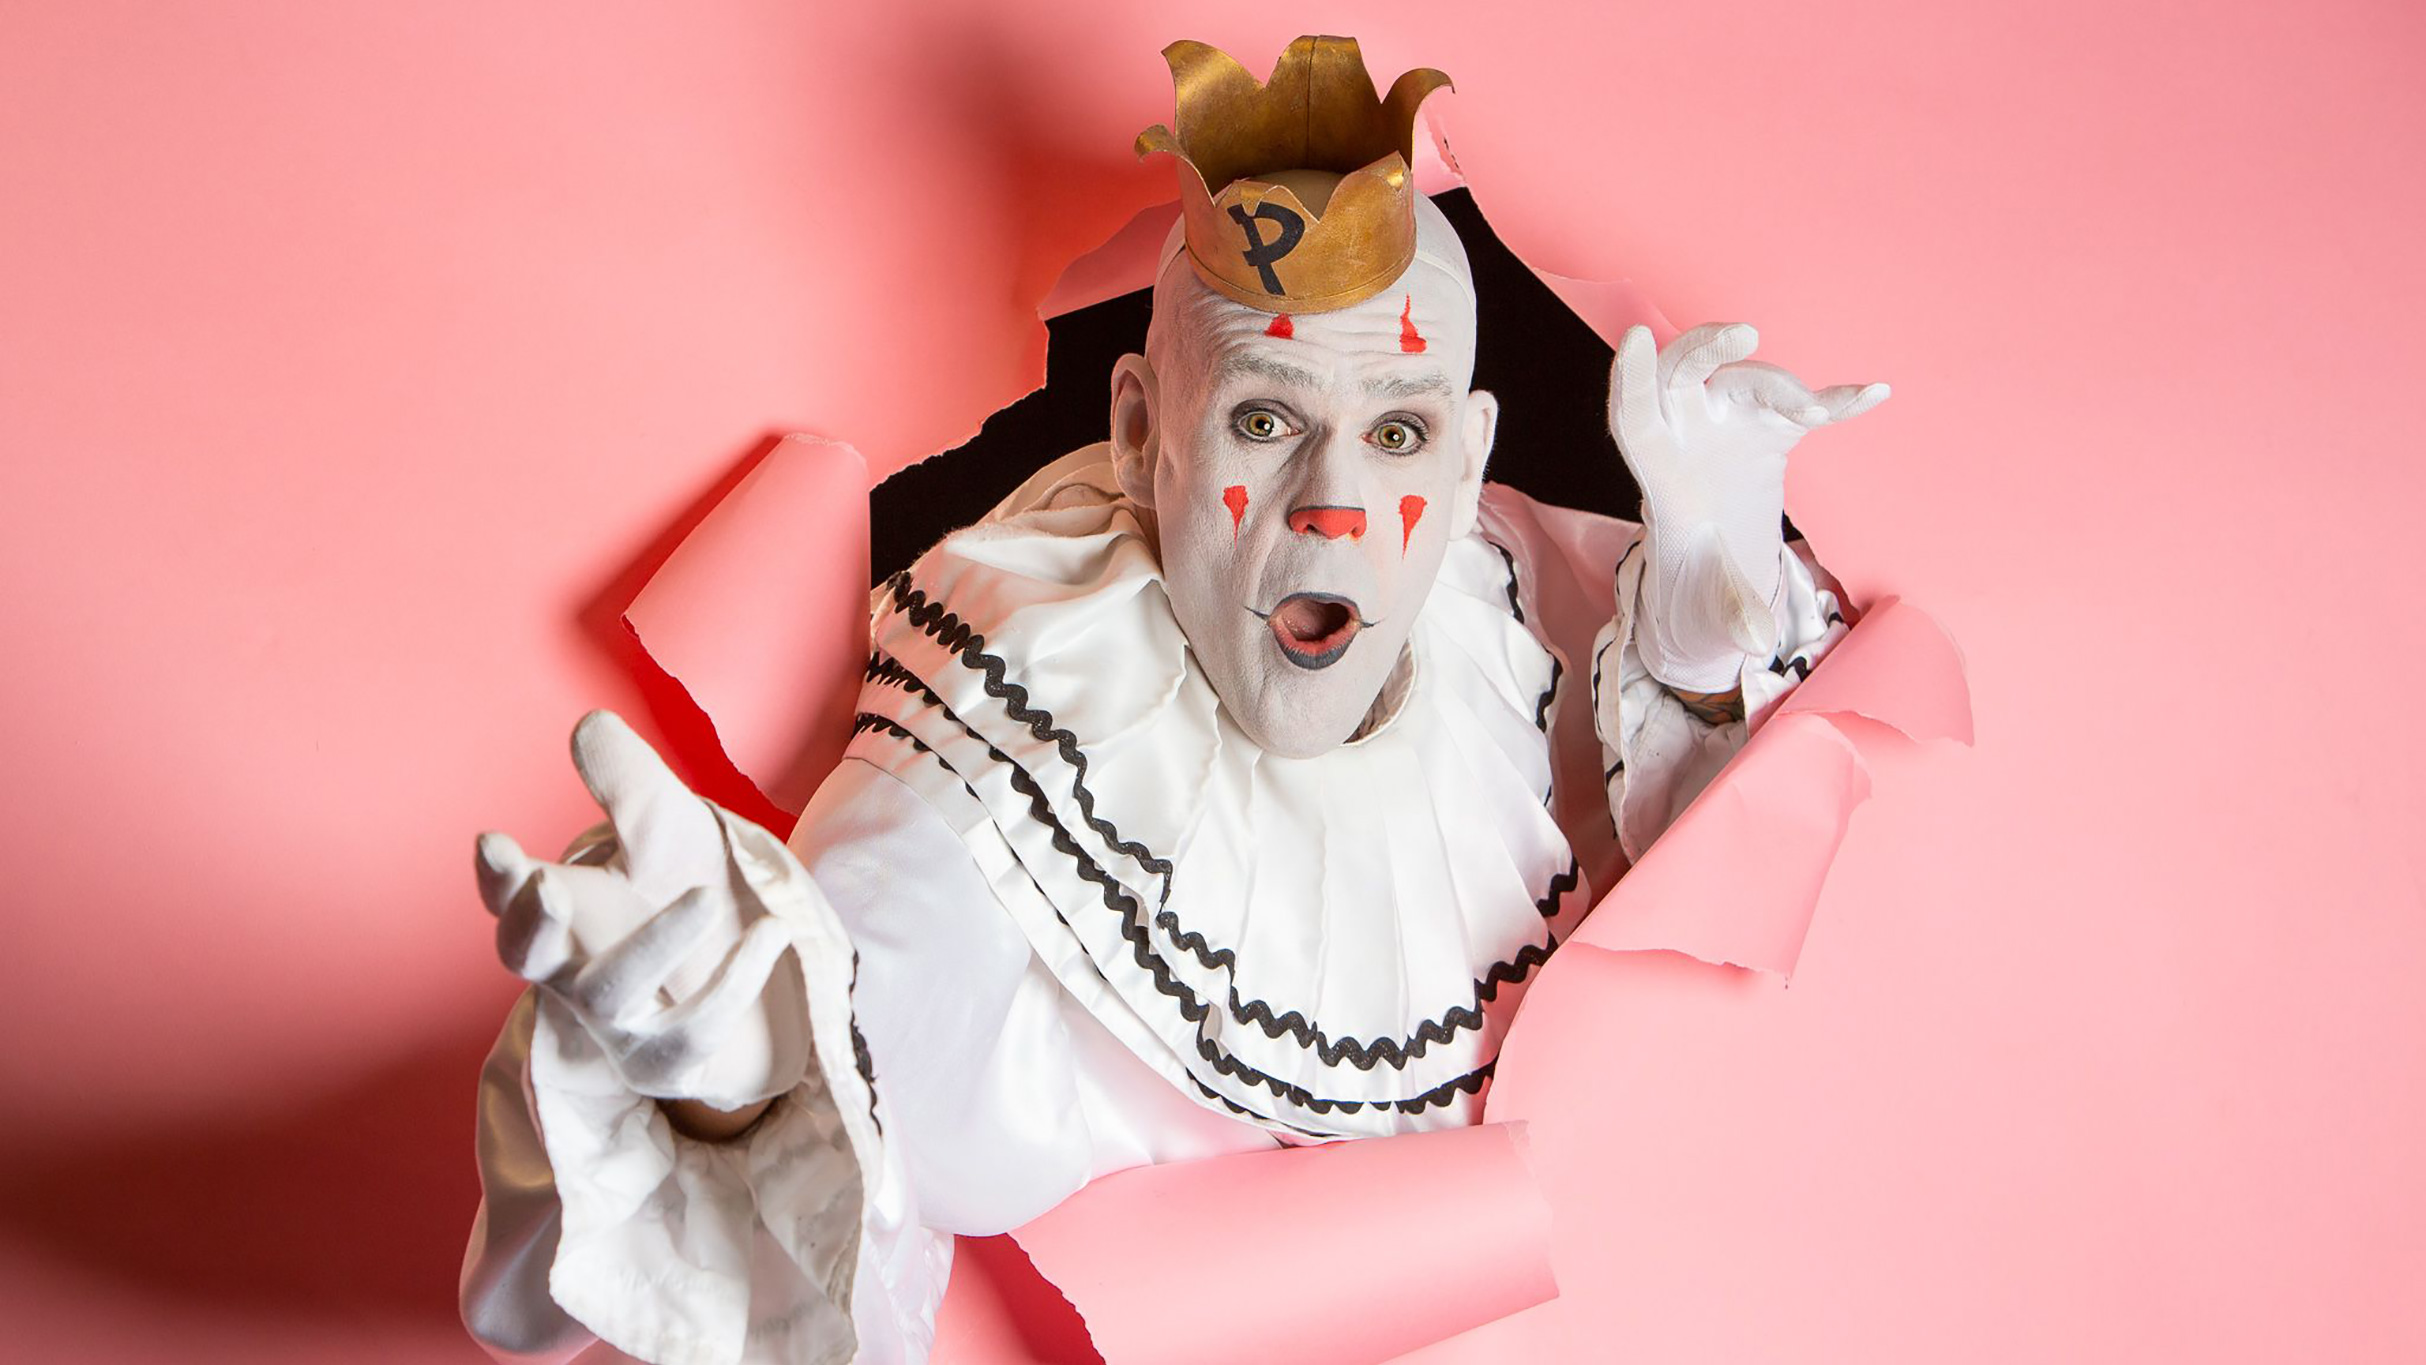 SOLD OUT - Puddles Pity Party